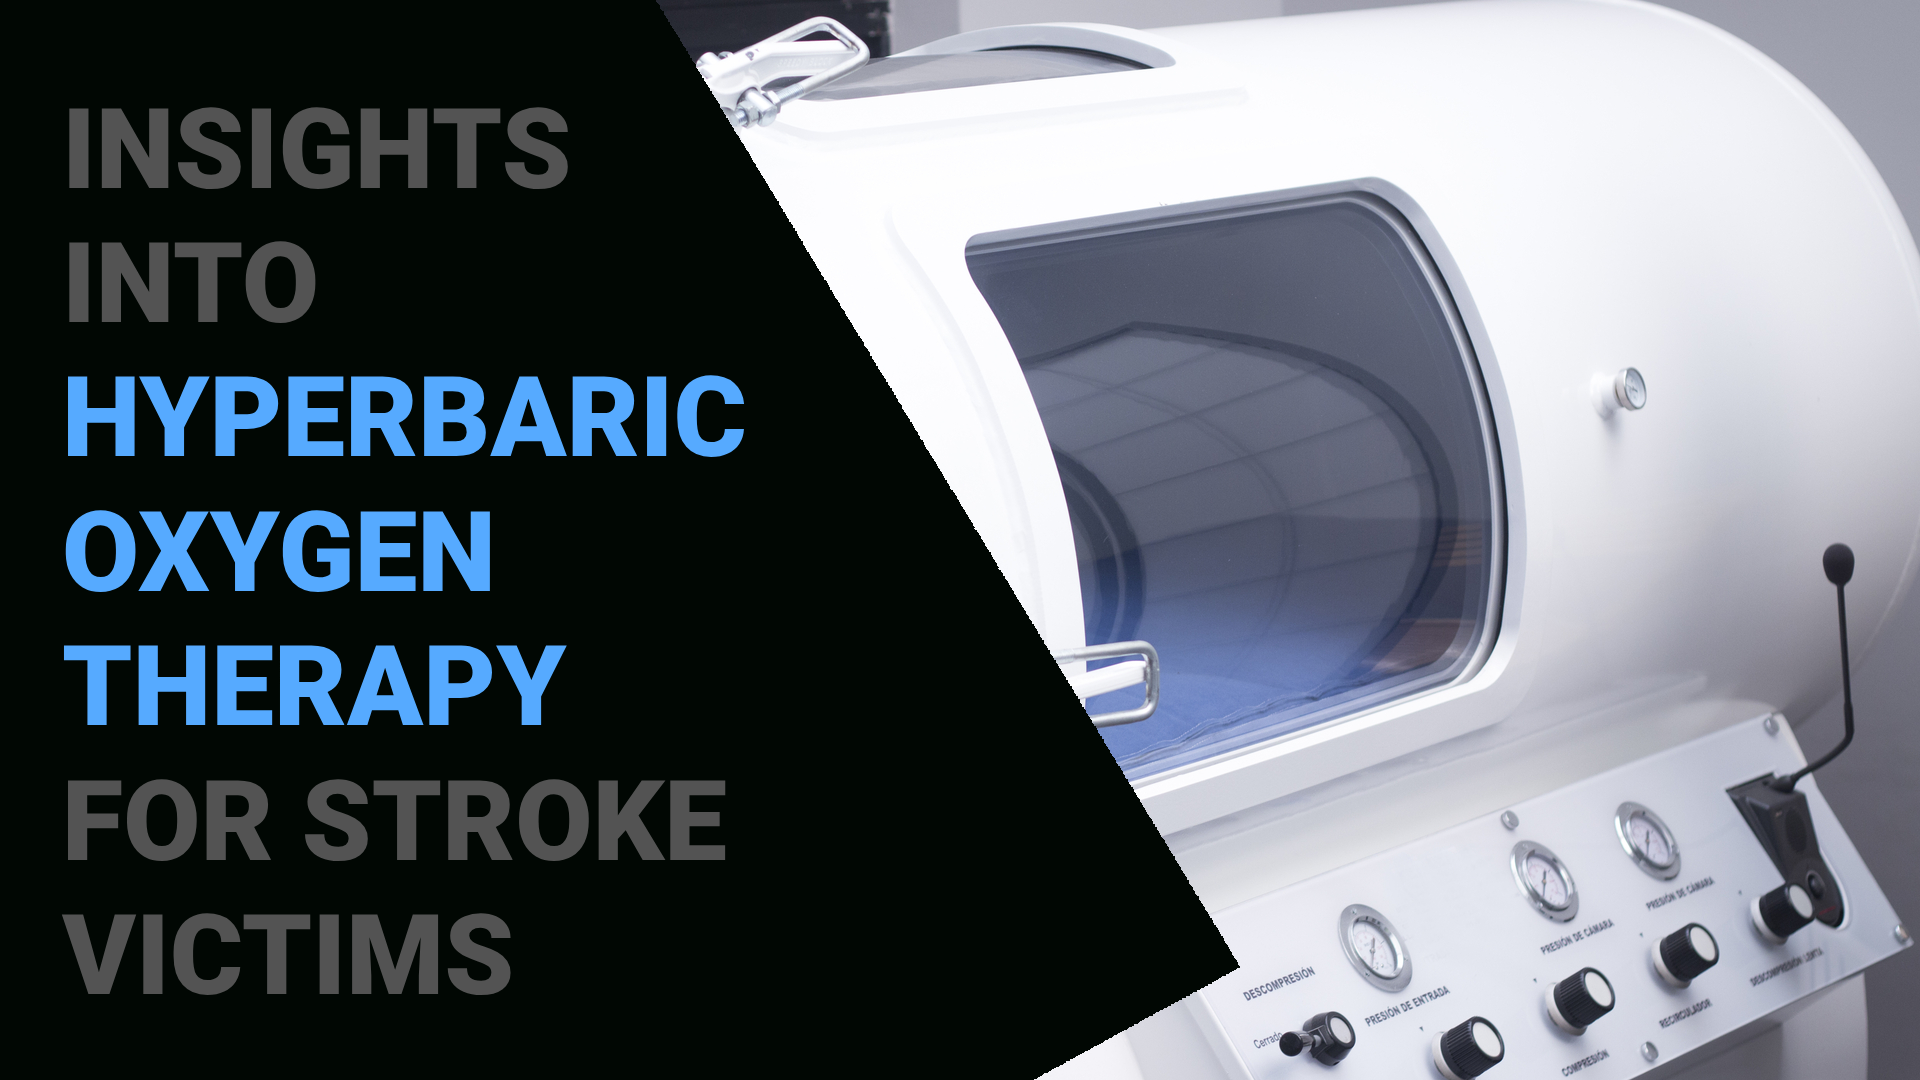 Featured image for “Insights into Hyperbaric Oxygen Therapy for Stroke Victims”